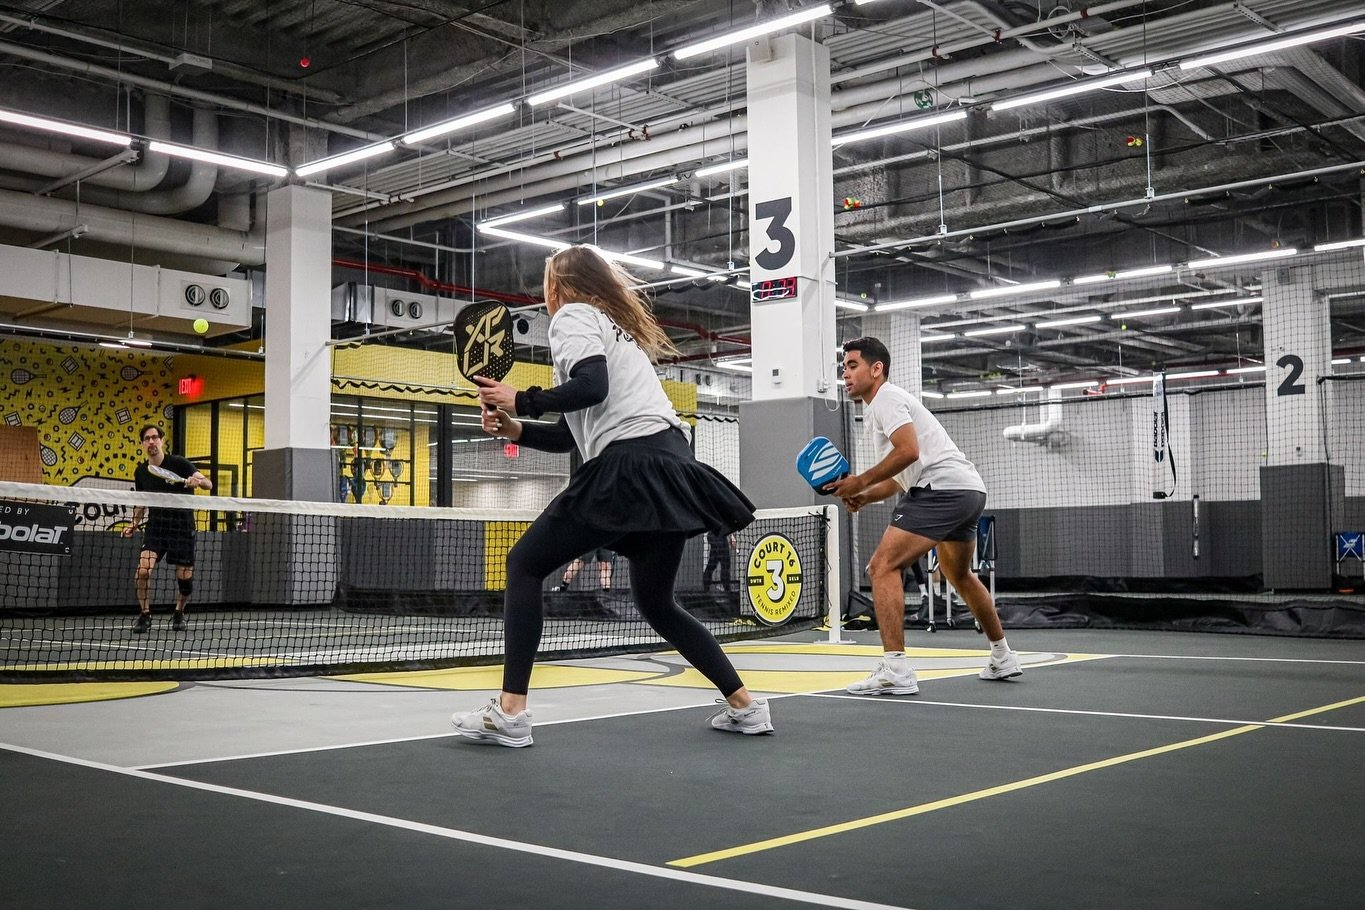 Meet our dynamic duo, Coaches Robert and Paulina! You probably have seen them at our Downtown Brooklyn Club. As they&rsquo;re stepping up their game and diving into the competitive pickleball scene, they&rsquo;re training at home at Court 16 BK. 

We